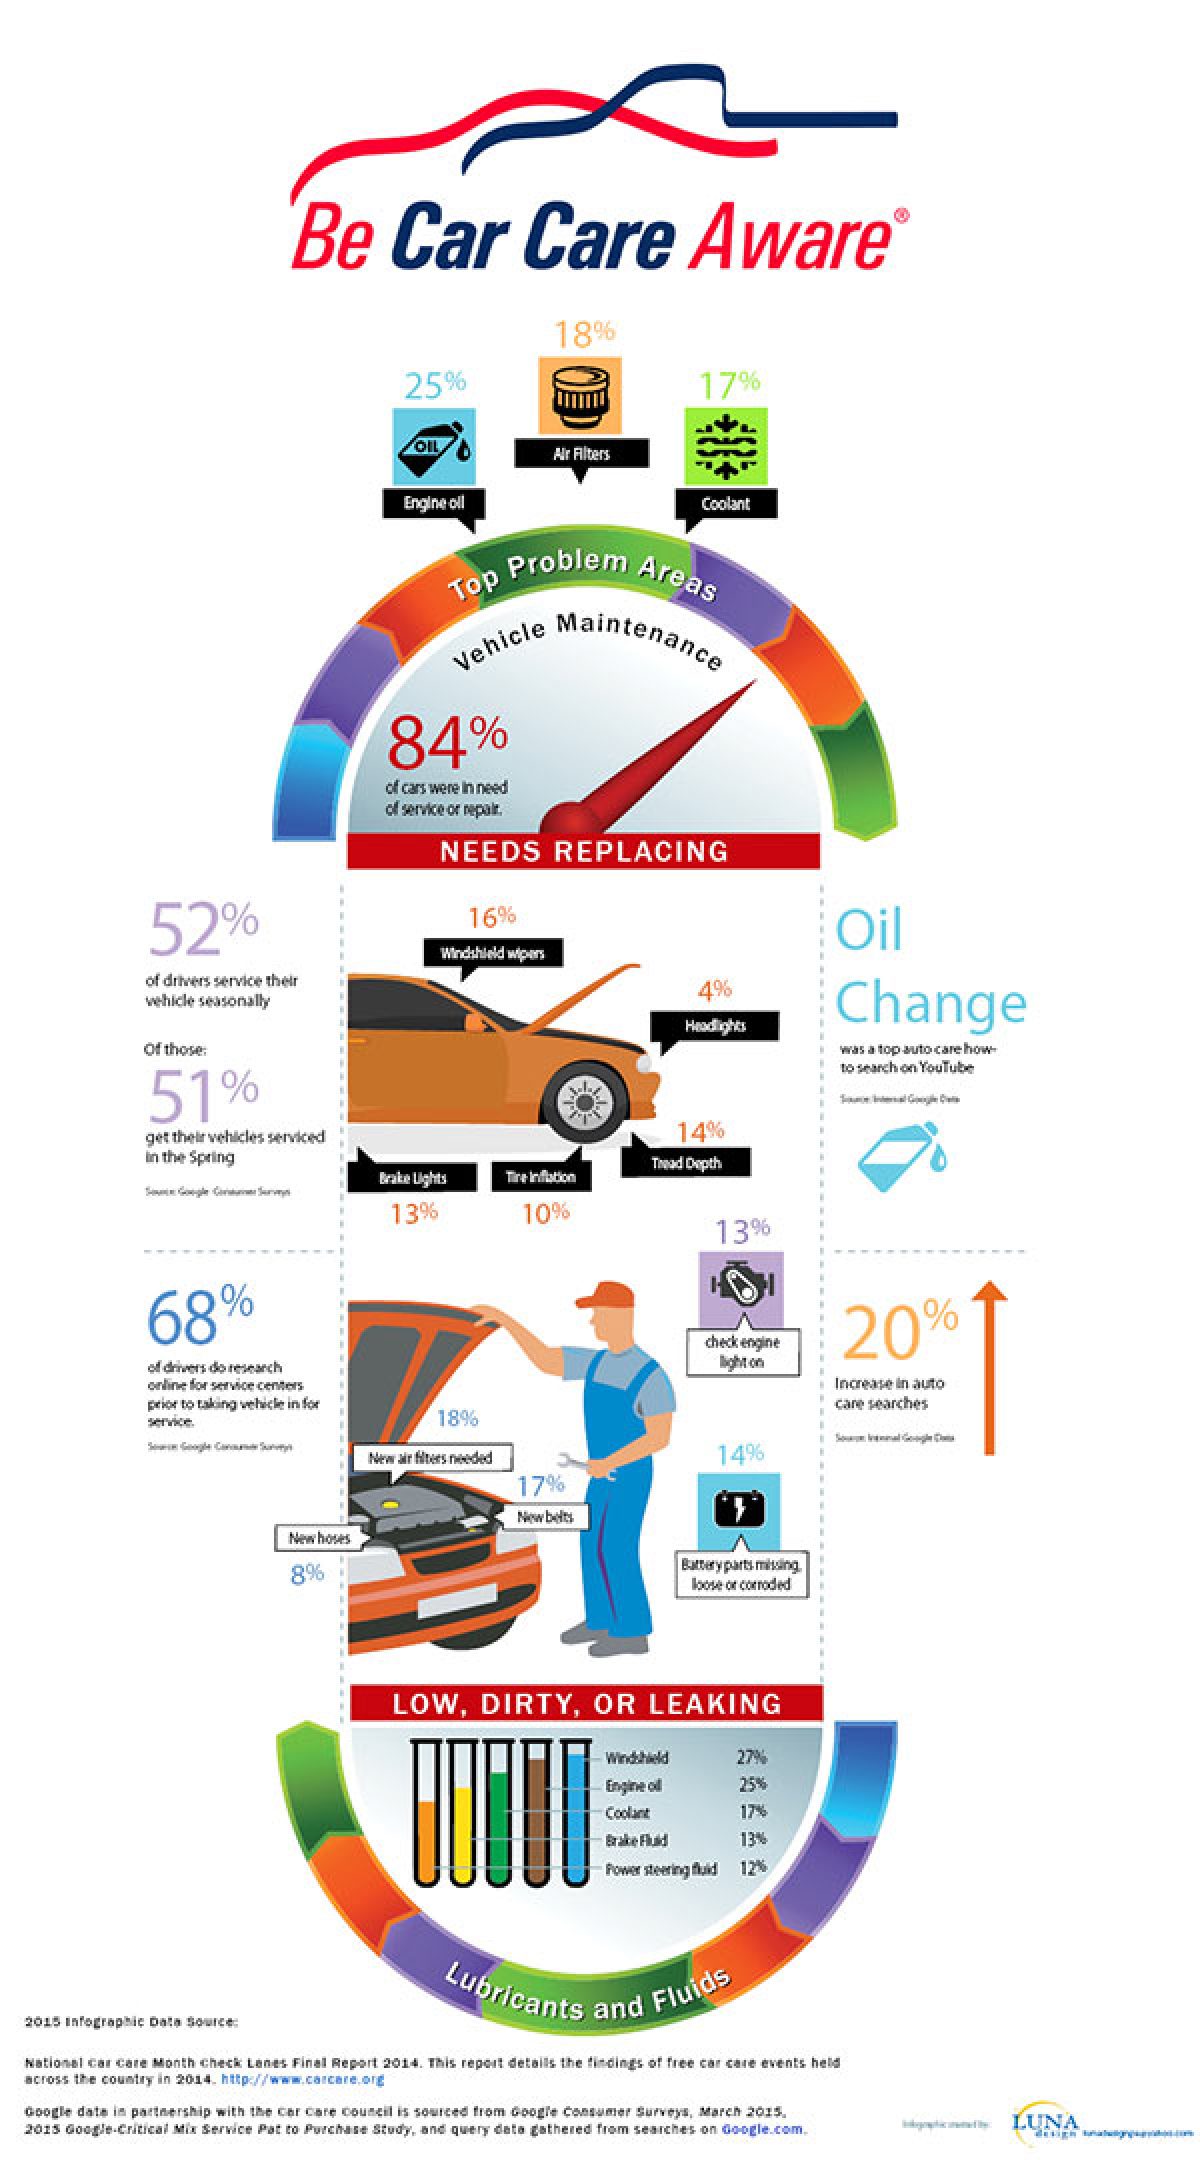 Infographic: Qualities Every Auto Mechanic Should Have